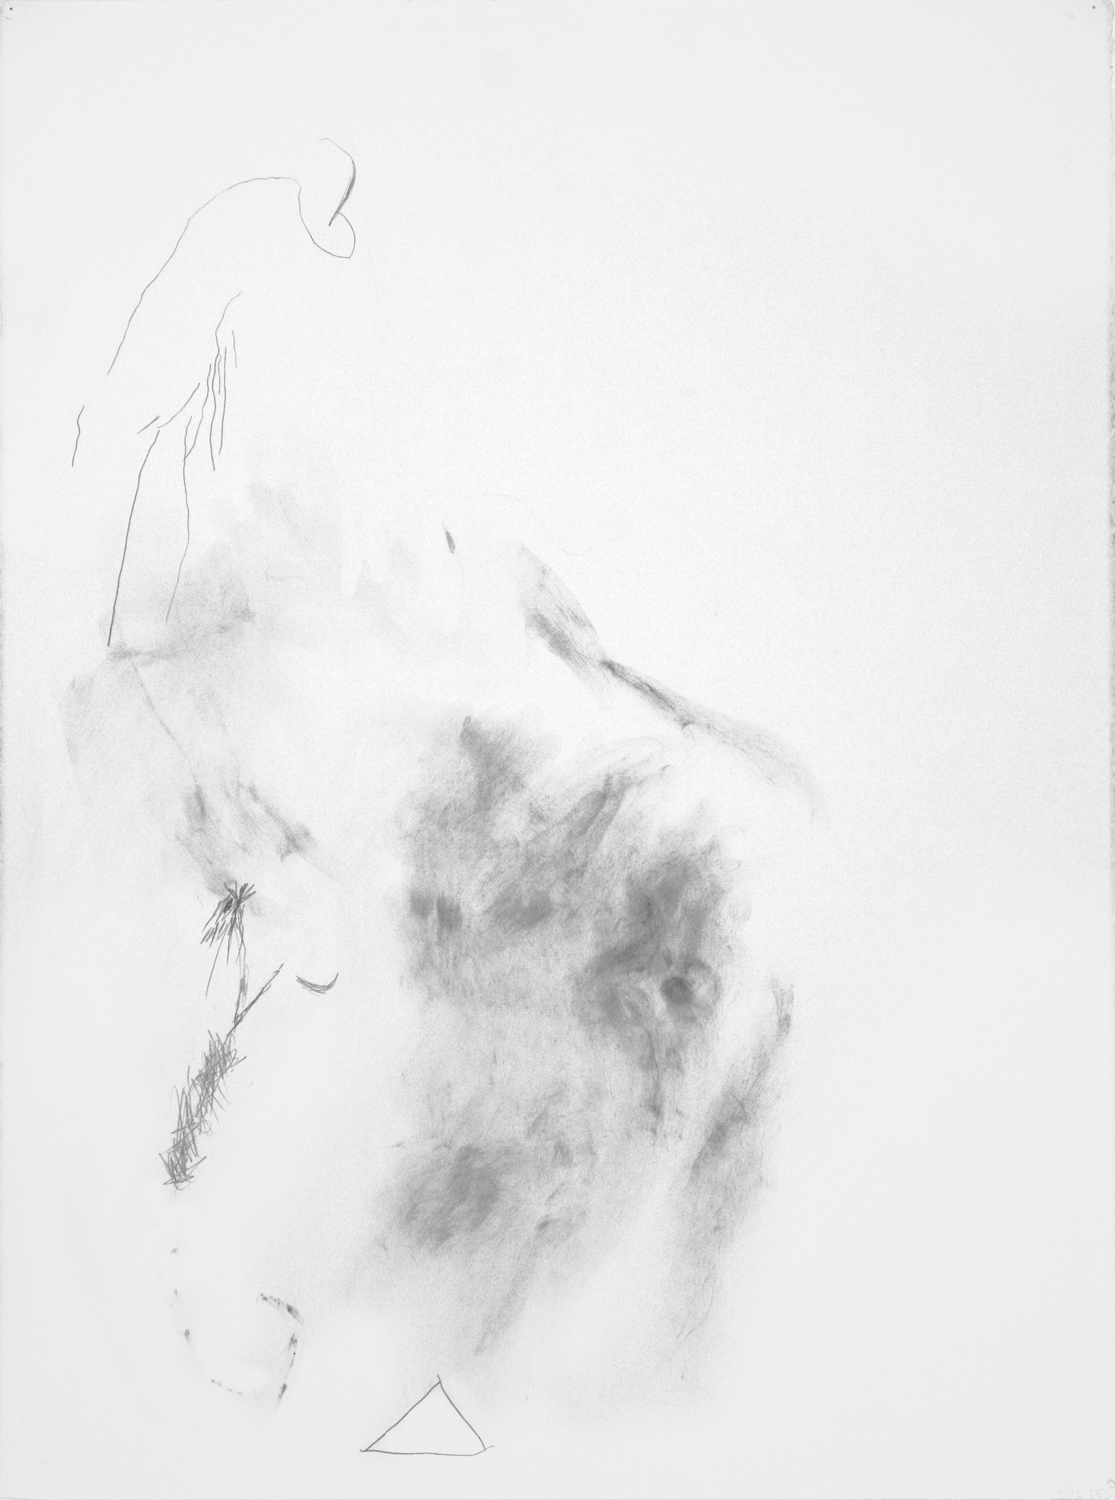  Untitled, 2012. 30" x 22", pencil on paper. 